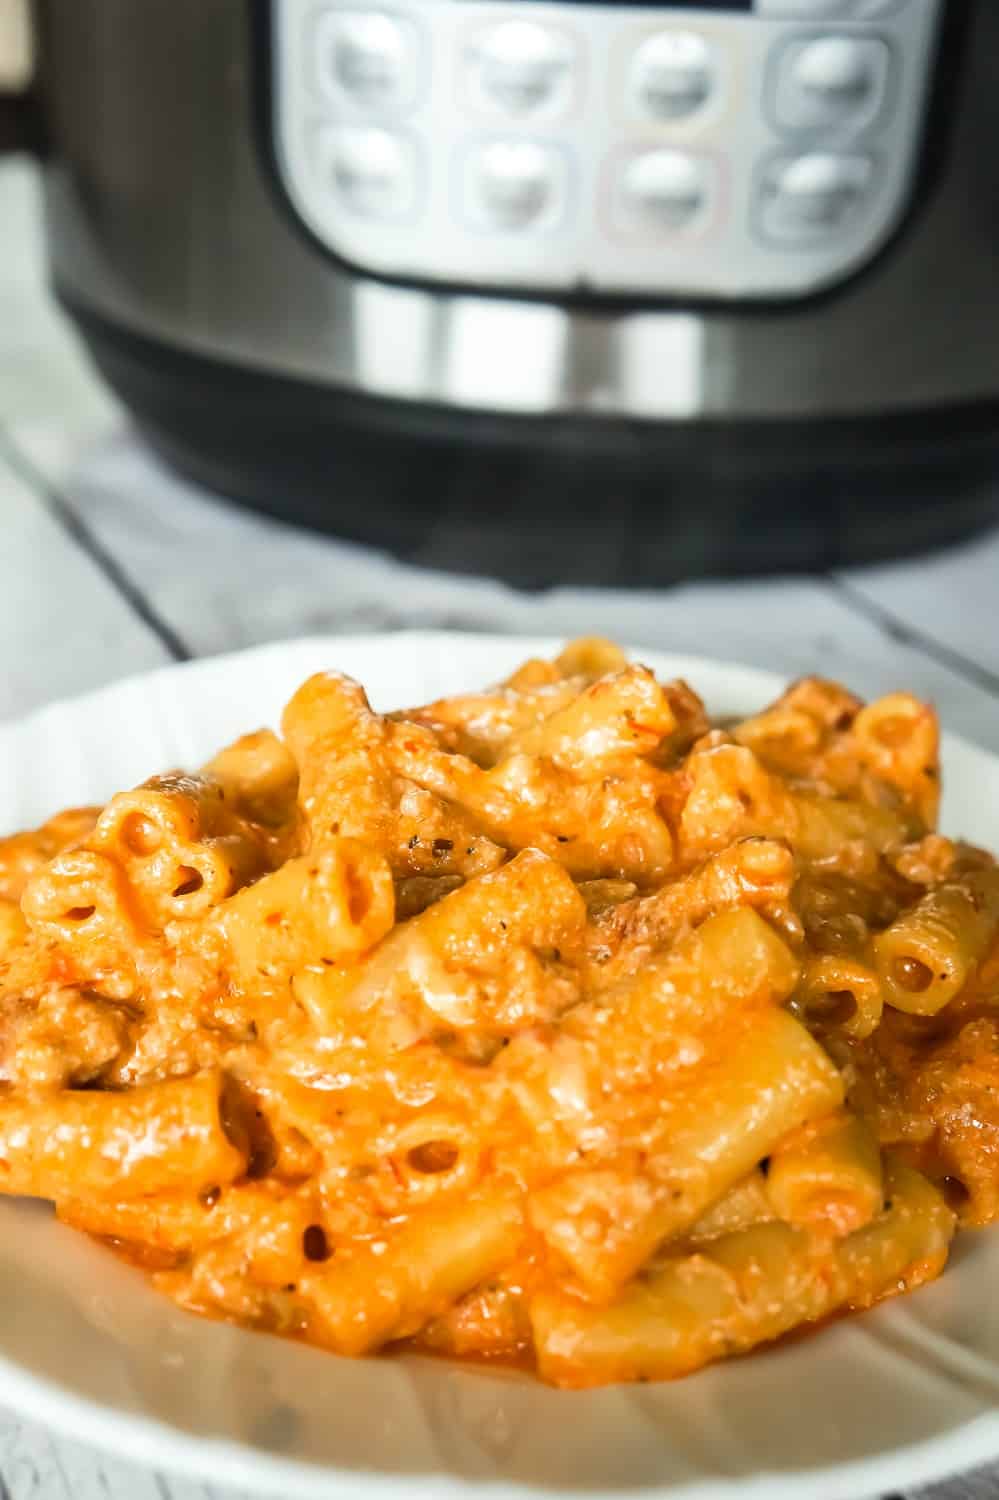 Instant Pot Ziti with Sausage and Ricotta is an easy Instant Pot pasta recipe. This delicious pasta is tossed in a combination of marinara and ricotta and loaded with ground sausage meat and mozzarella cheese.